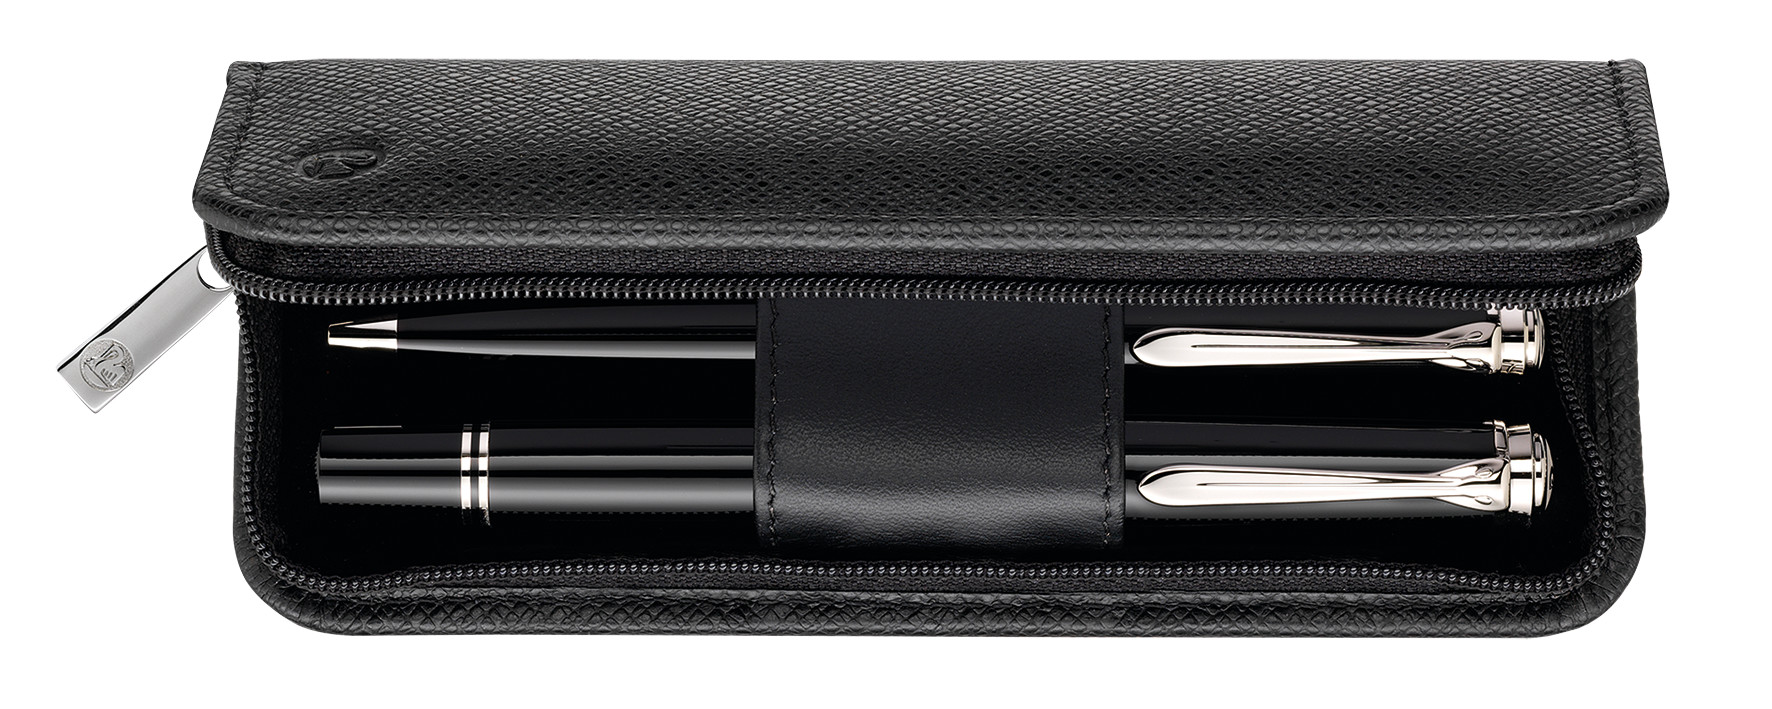 Pelikan Pencil Case Made of Grained Leather TGX2E for Two Writing Instruments, Black